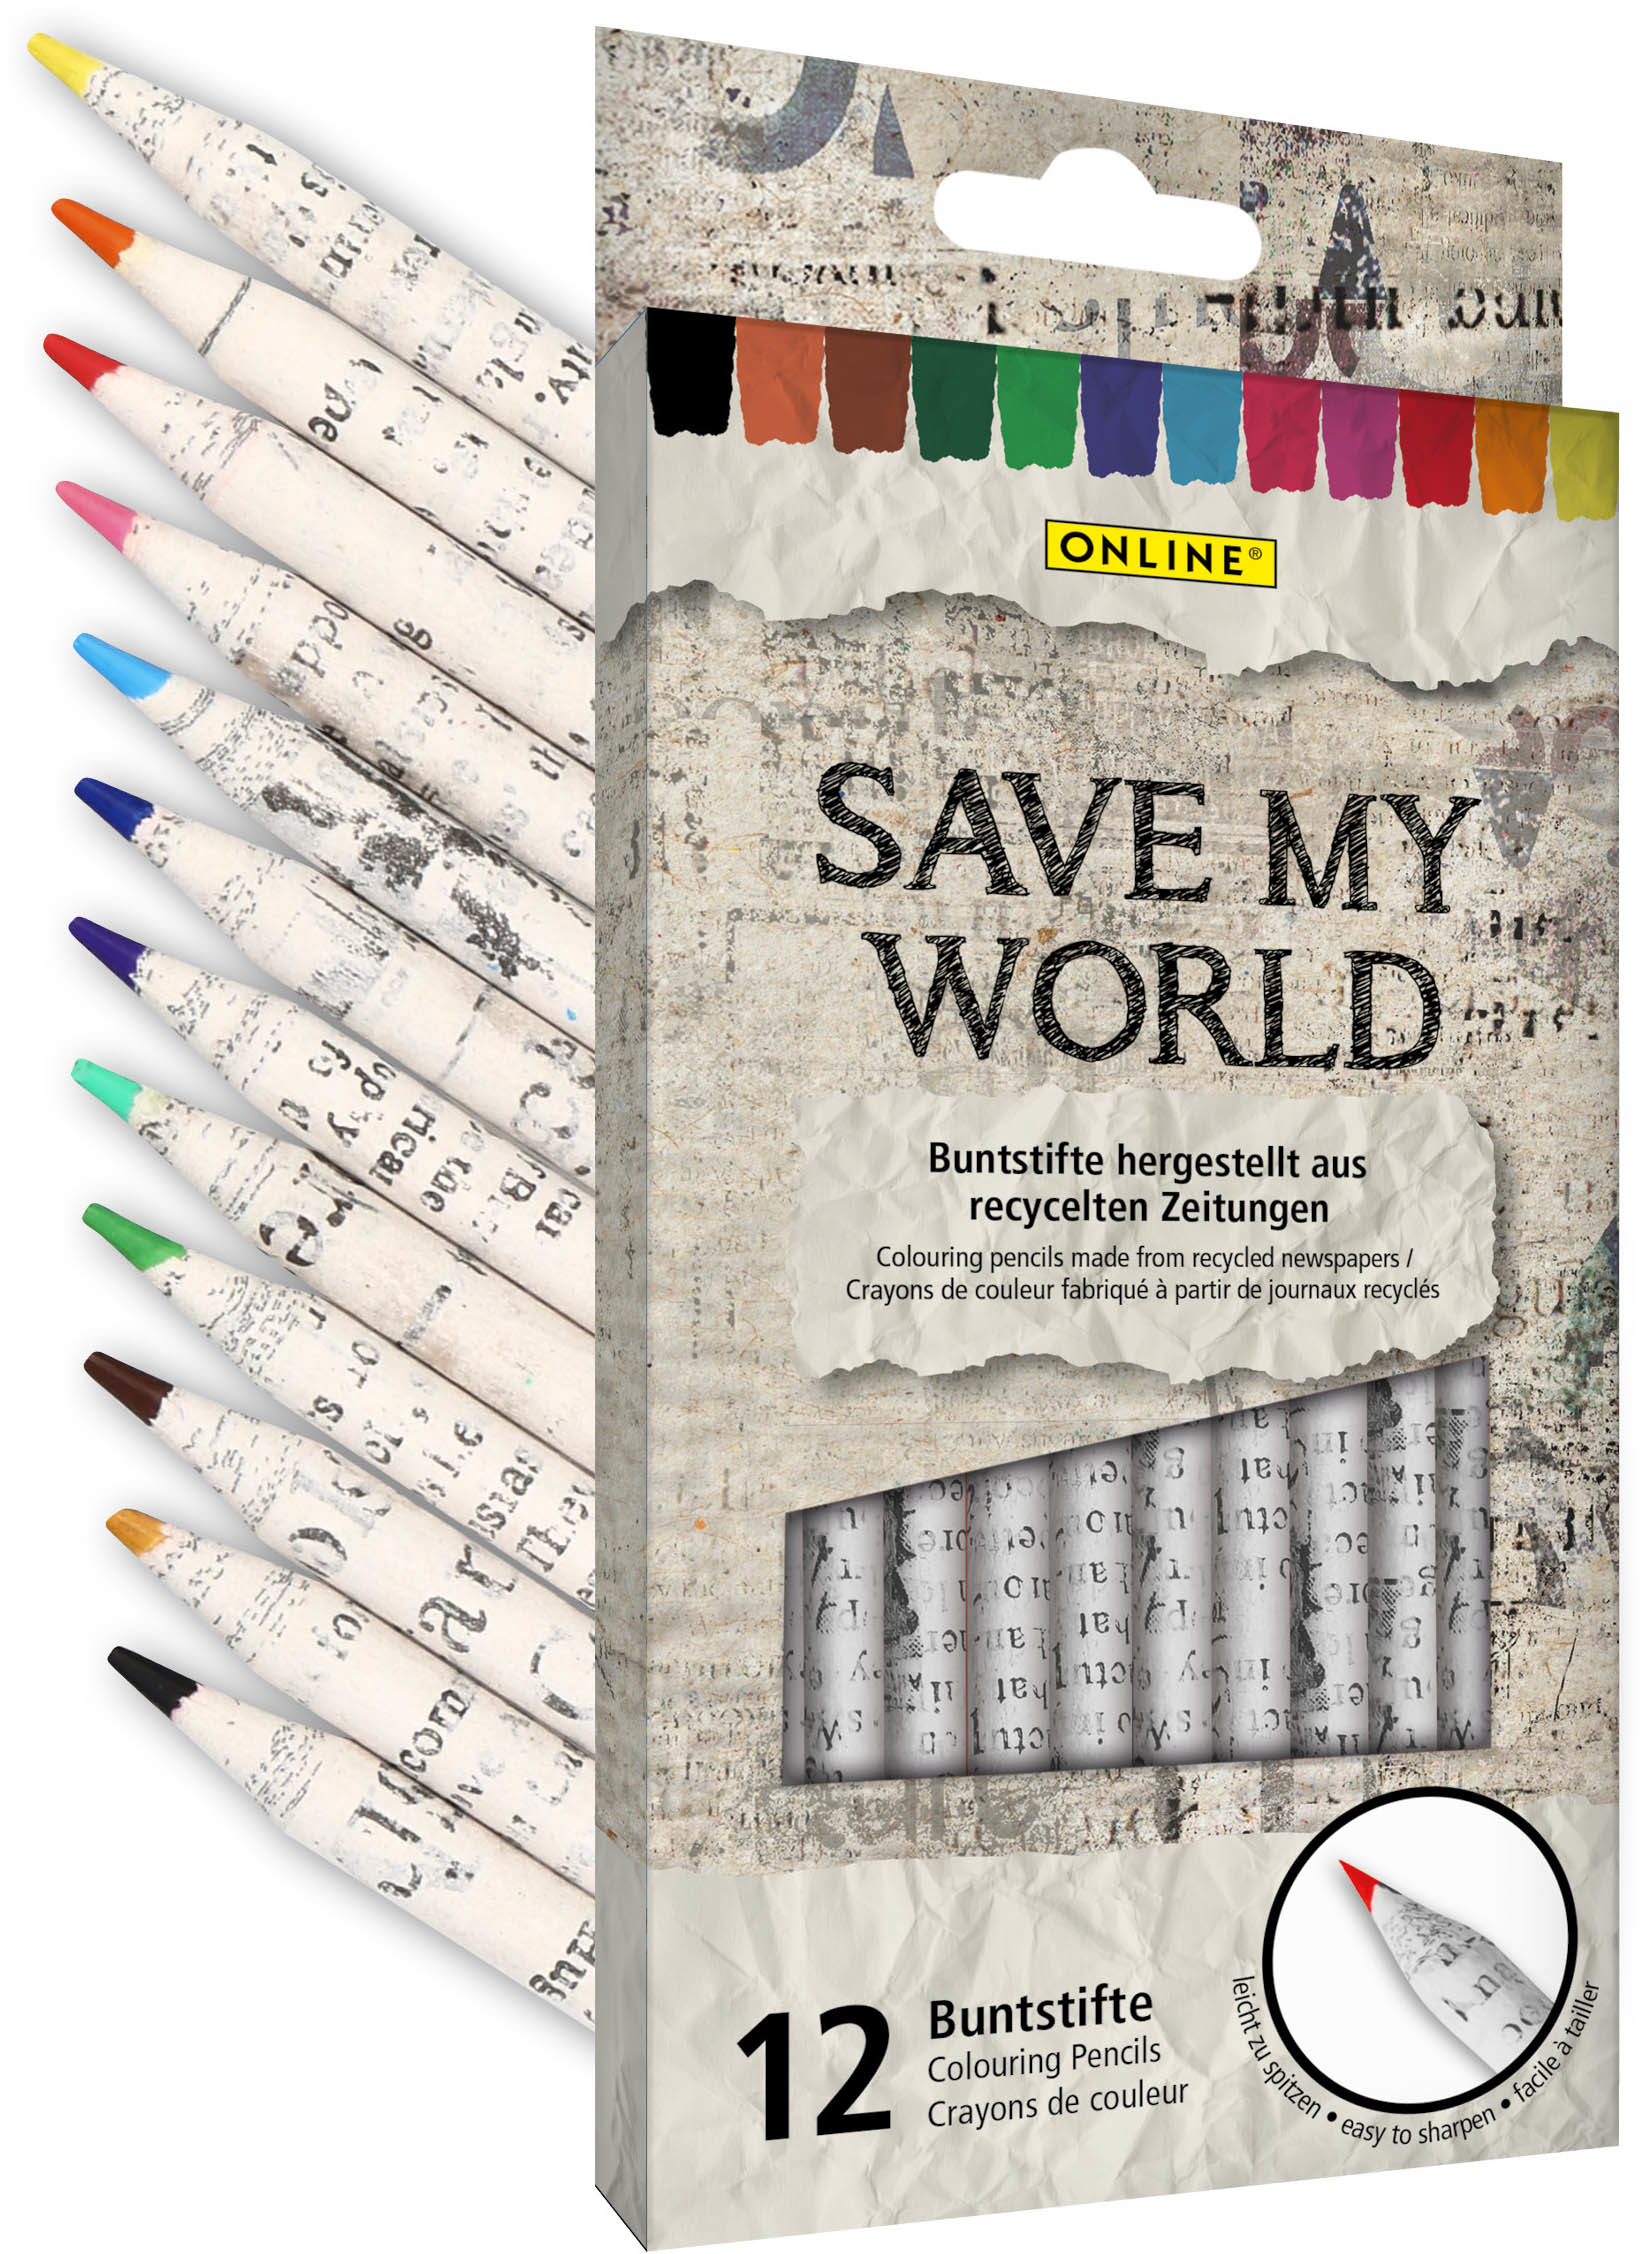 ONLINE Crayon coul. Save My World 7920 12 pcs.